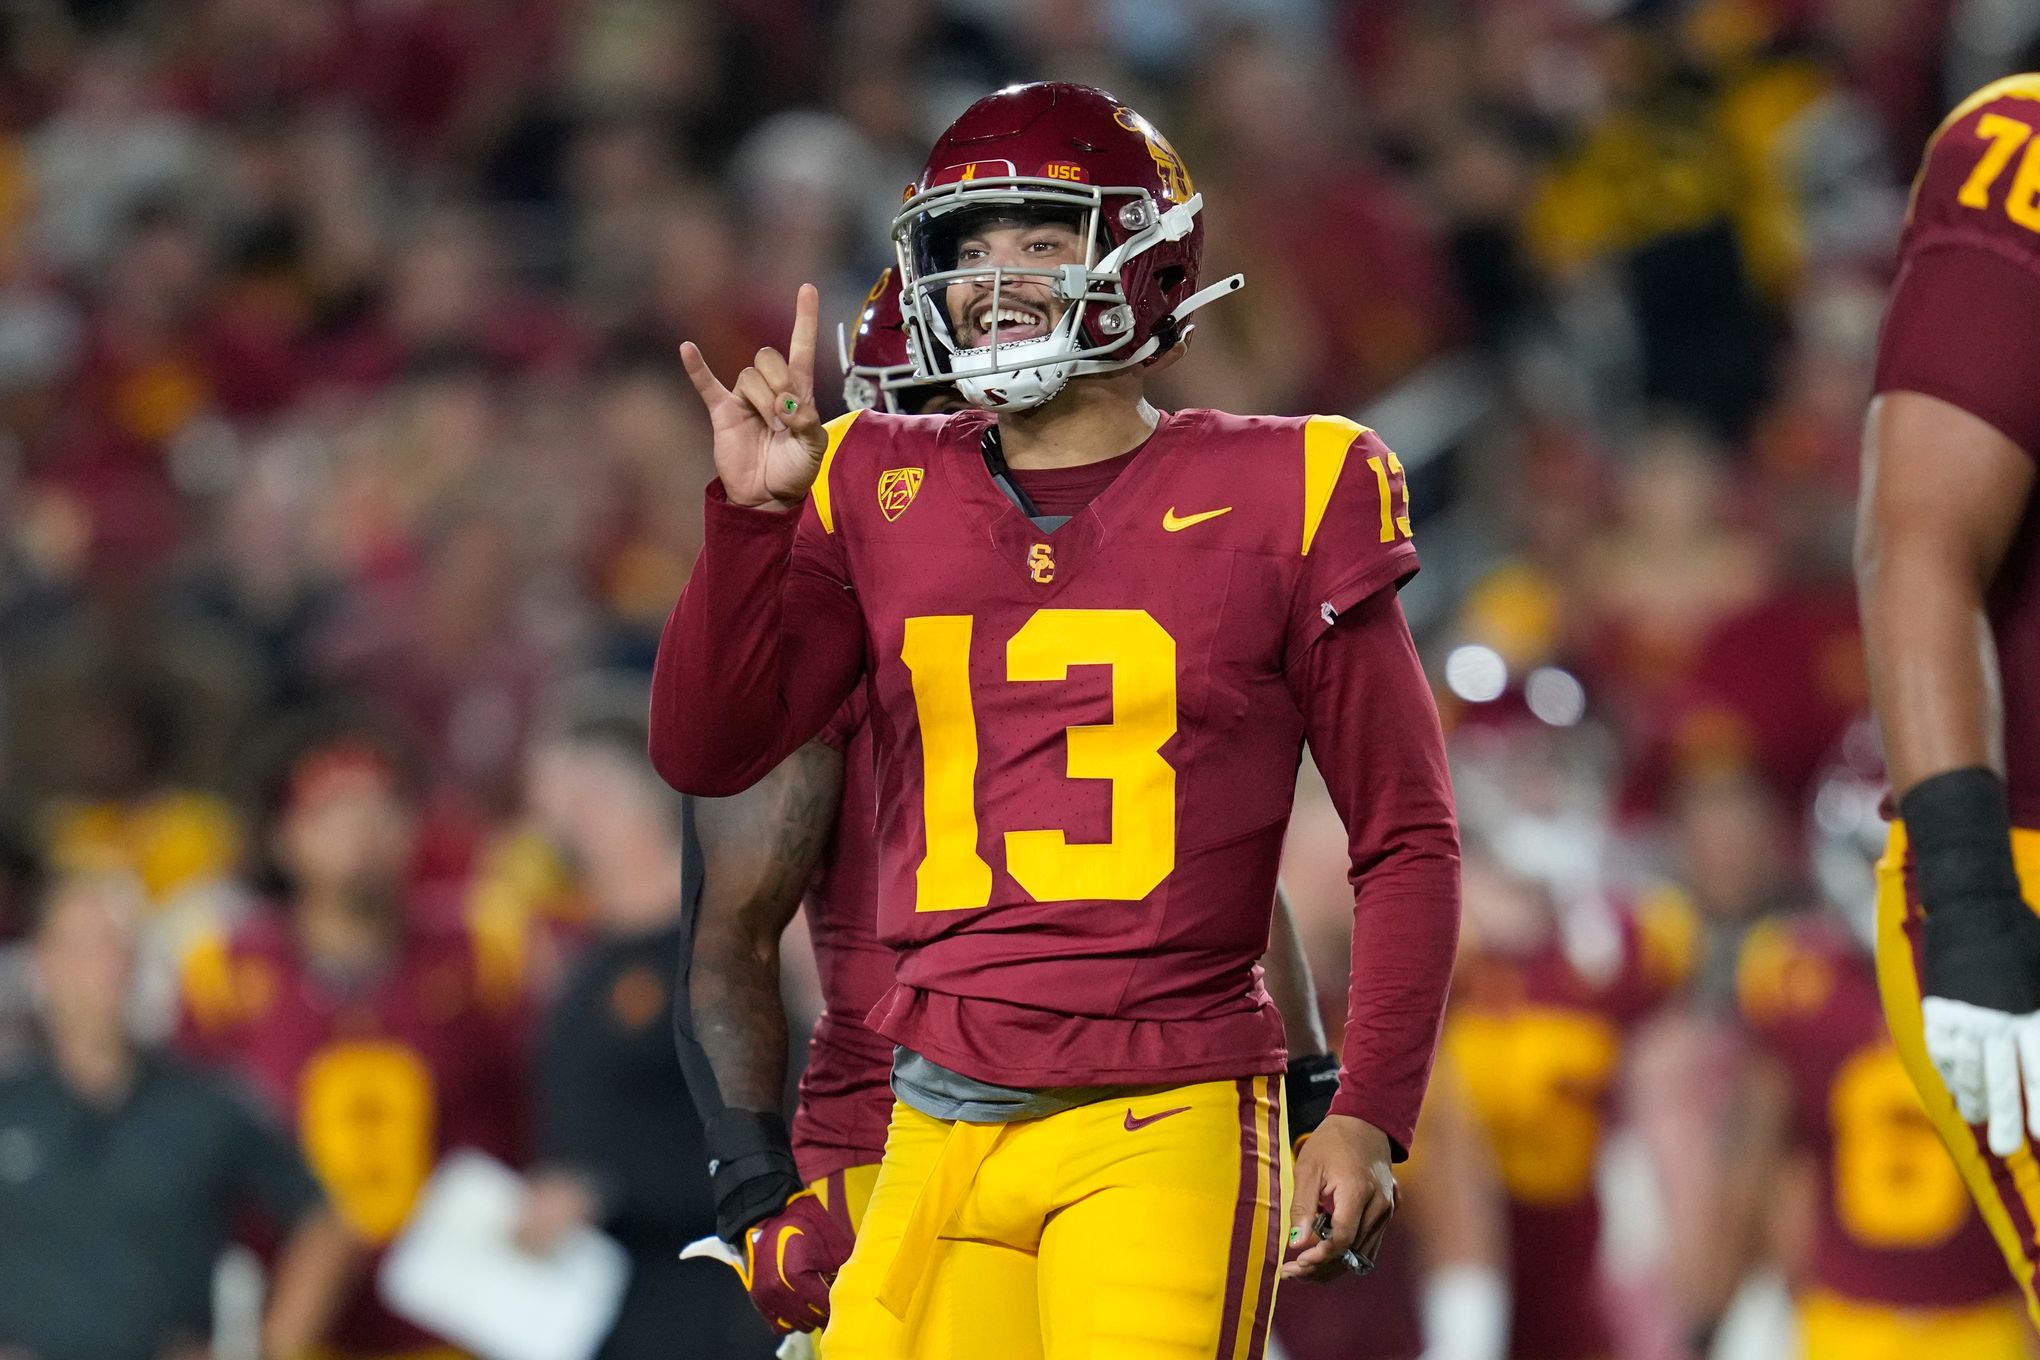 Notebook: Unbeaten USC out to end losing ways